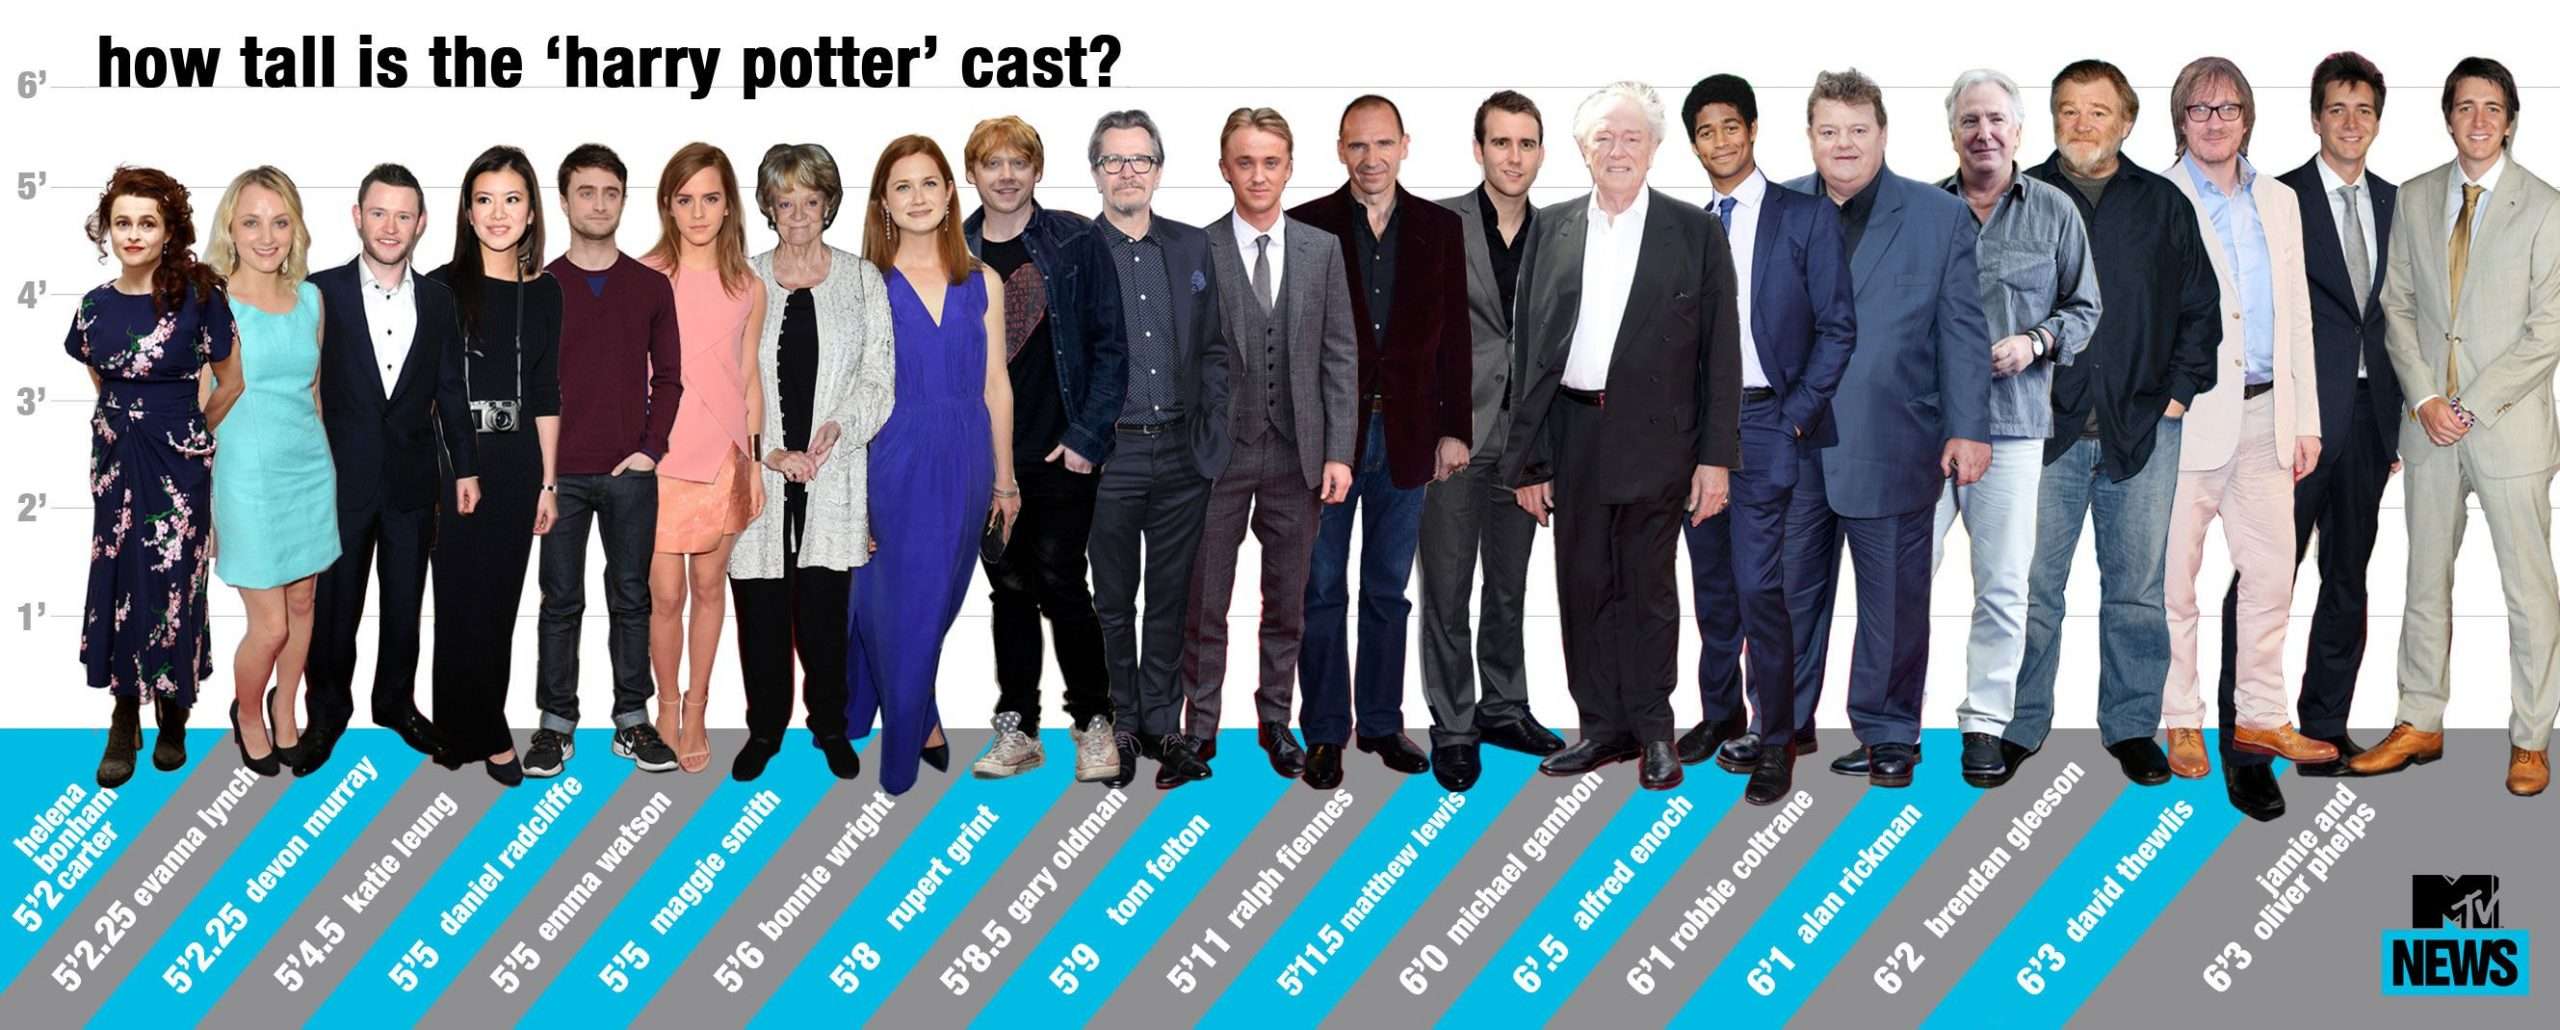 harry potter height chart whos the tallest actor scaled